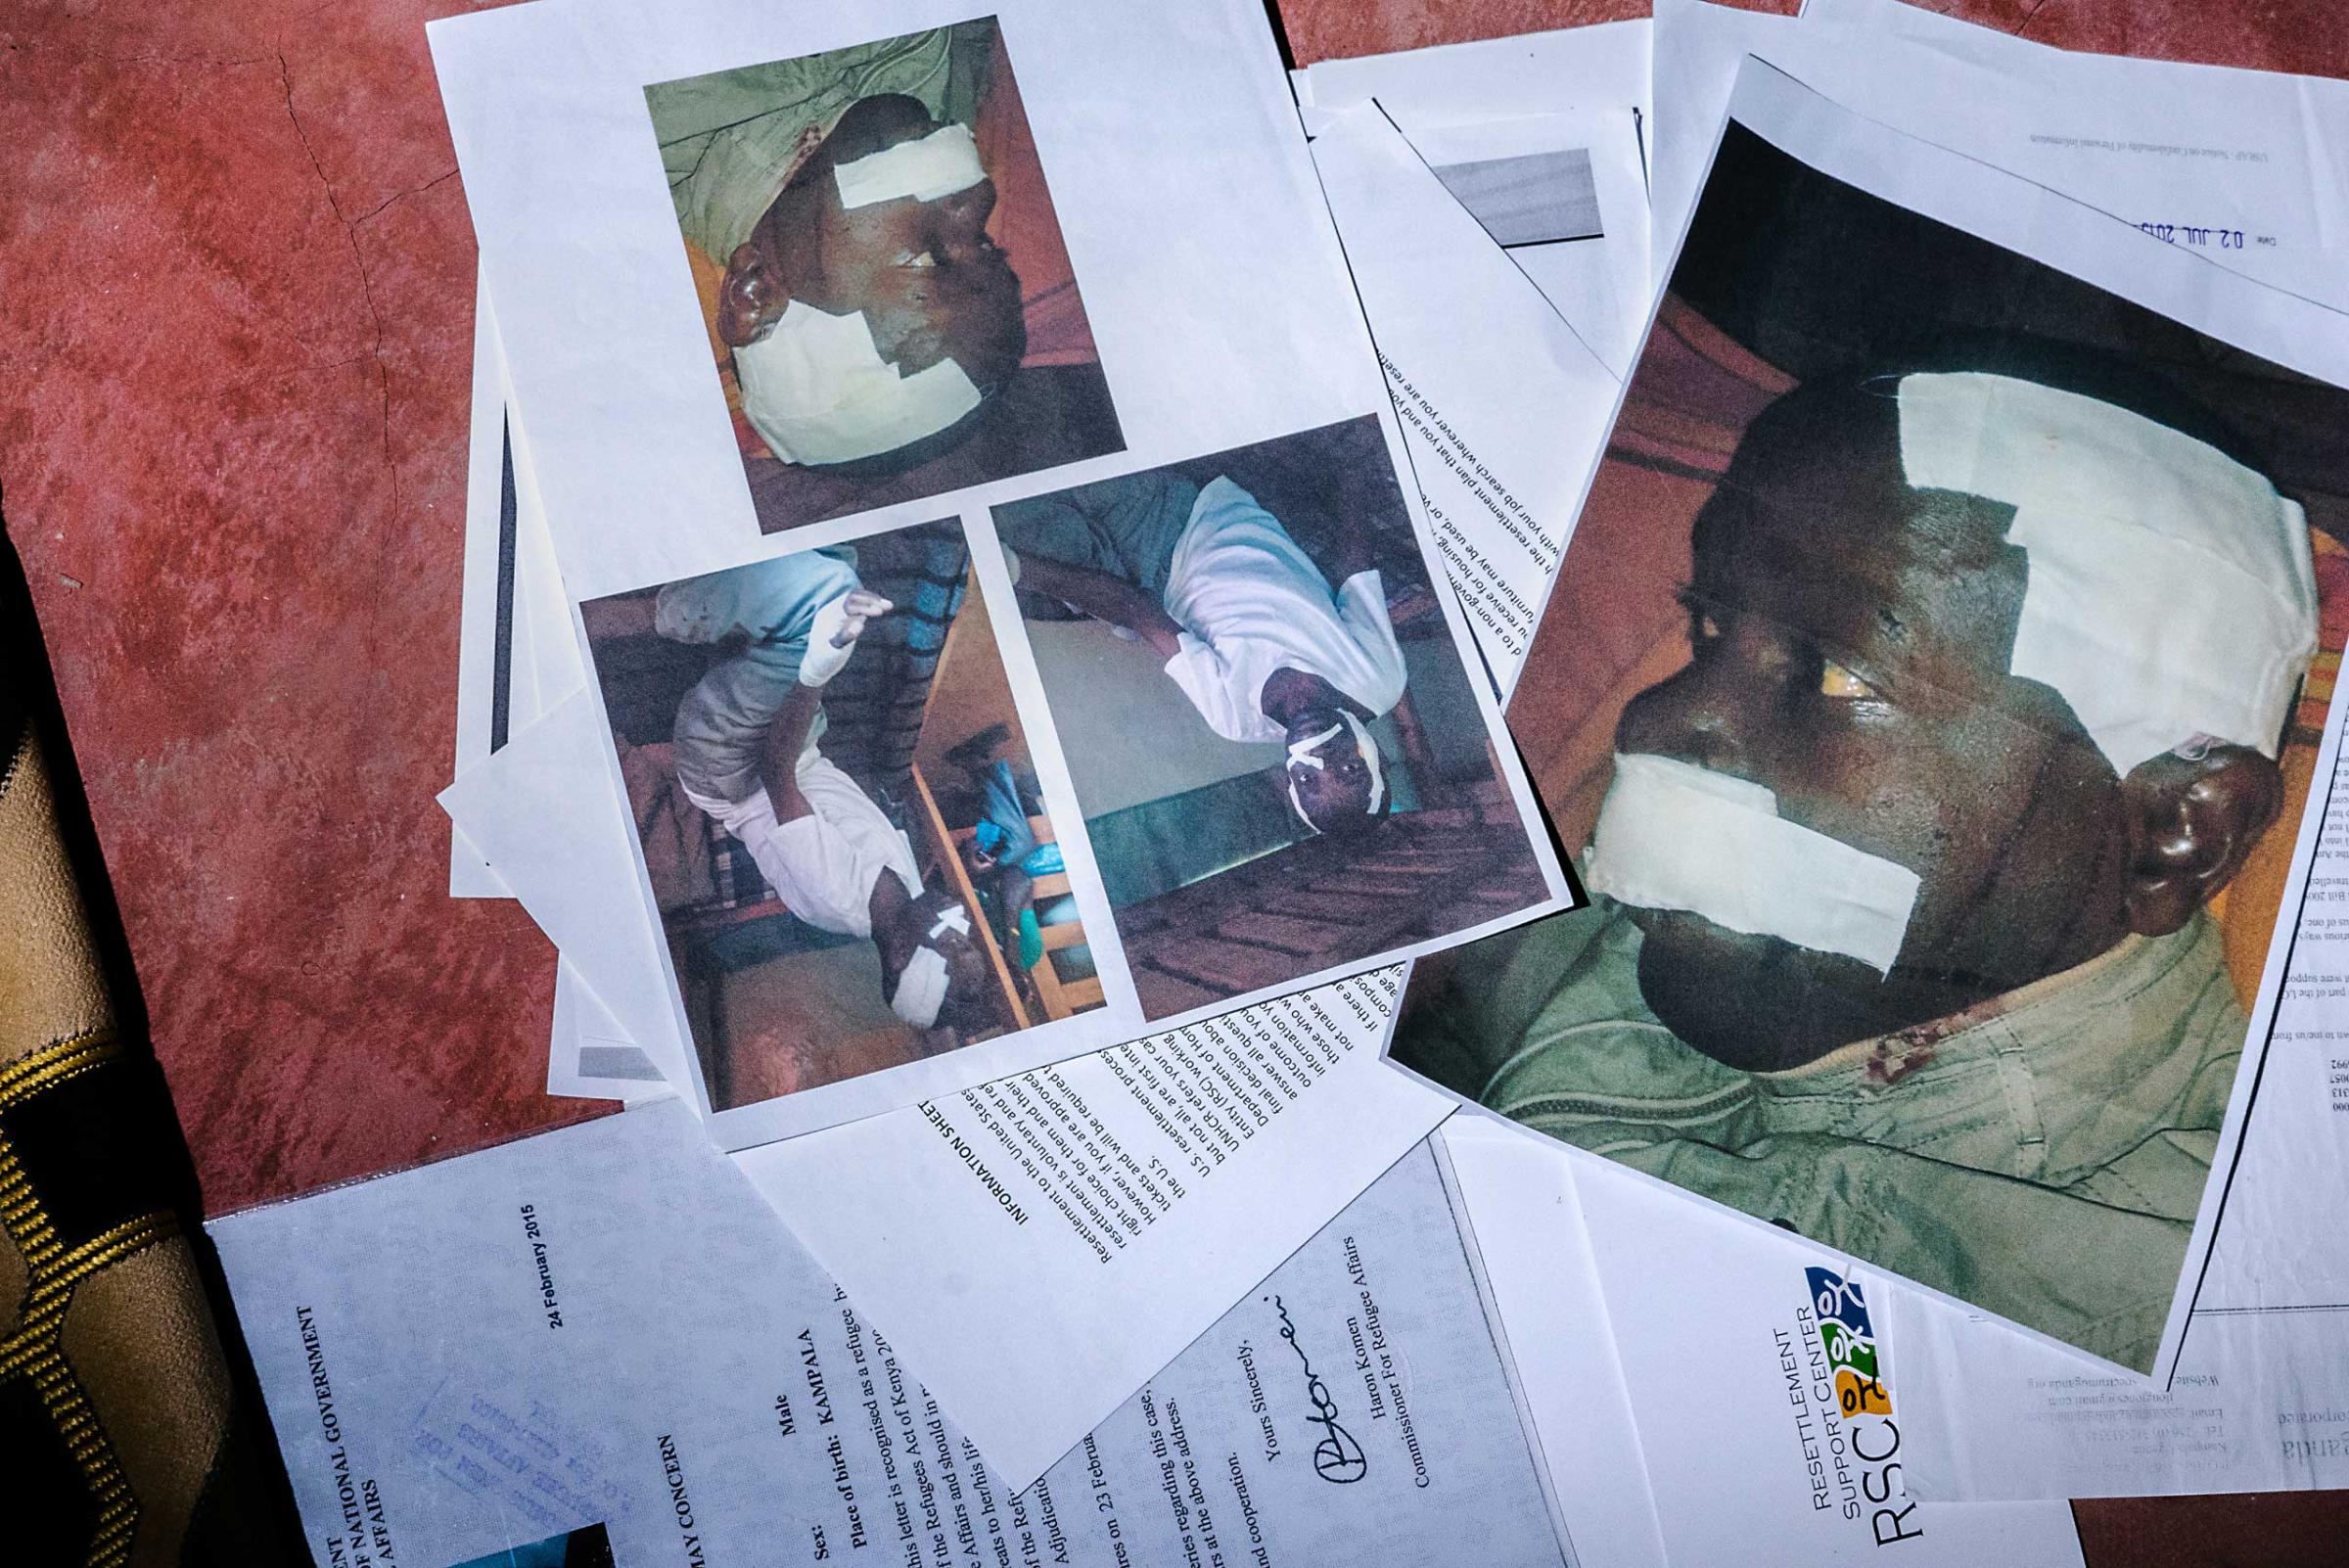 Soon after arriving in Kenya, S. was attacked by seven men with machetes. Here, evidence of his attack that he submitted as part of his resettlement application. He has since been resettled in the United States.